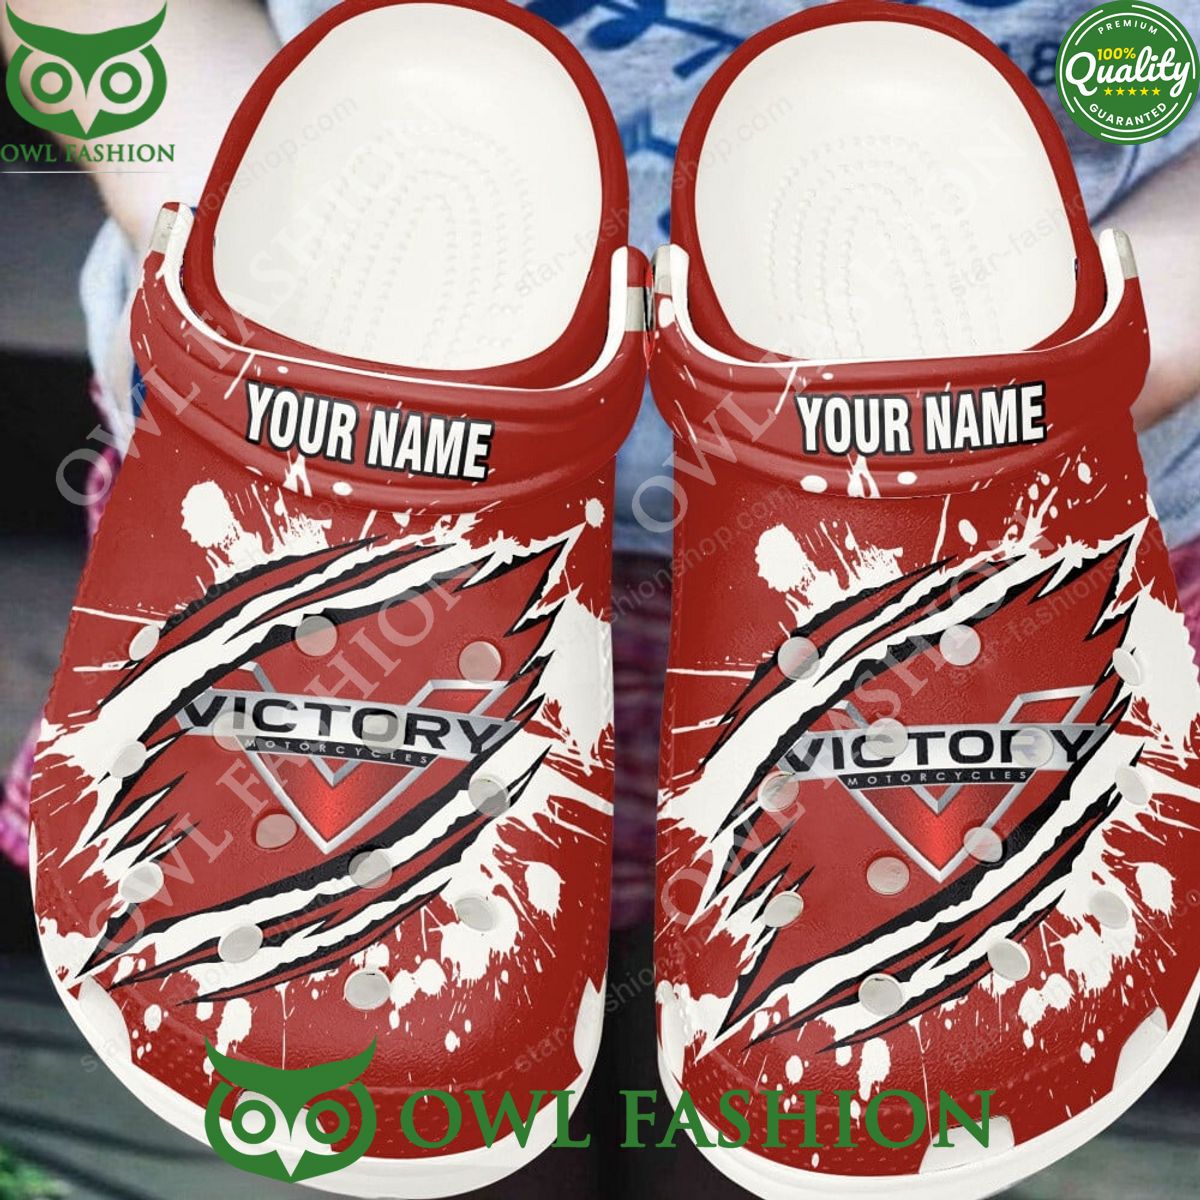 Victory Motorcycles Automobile Scratches Customized Crocs Nice photo dude